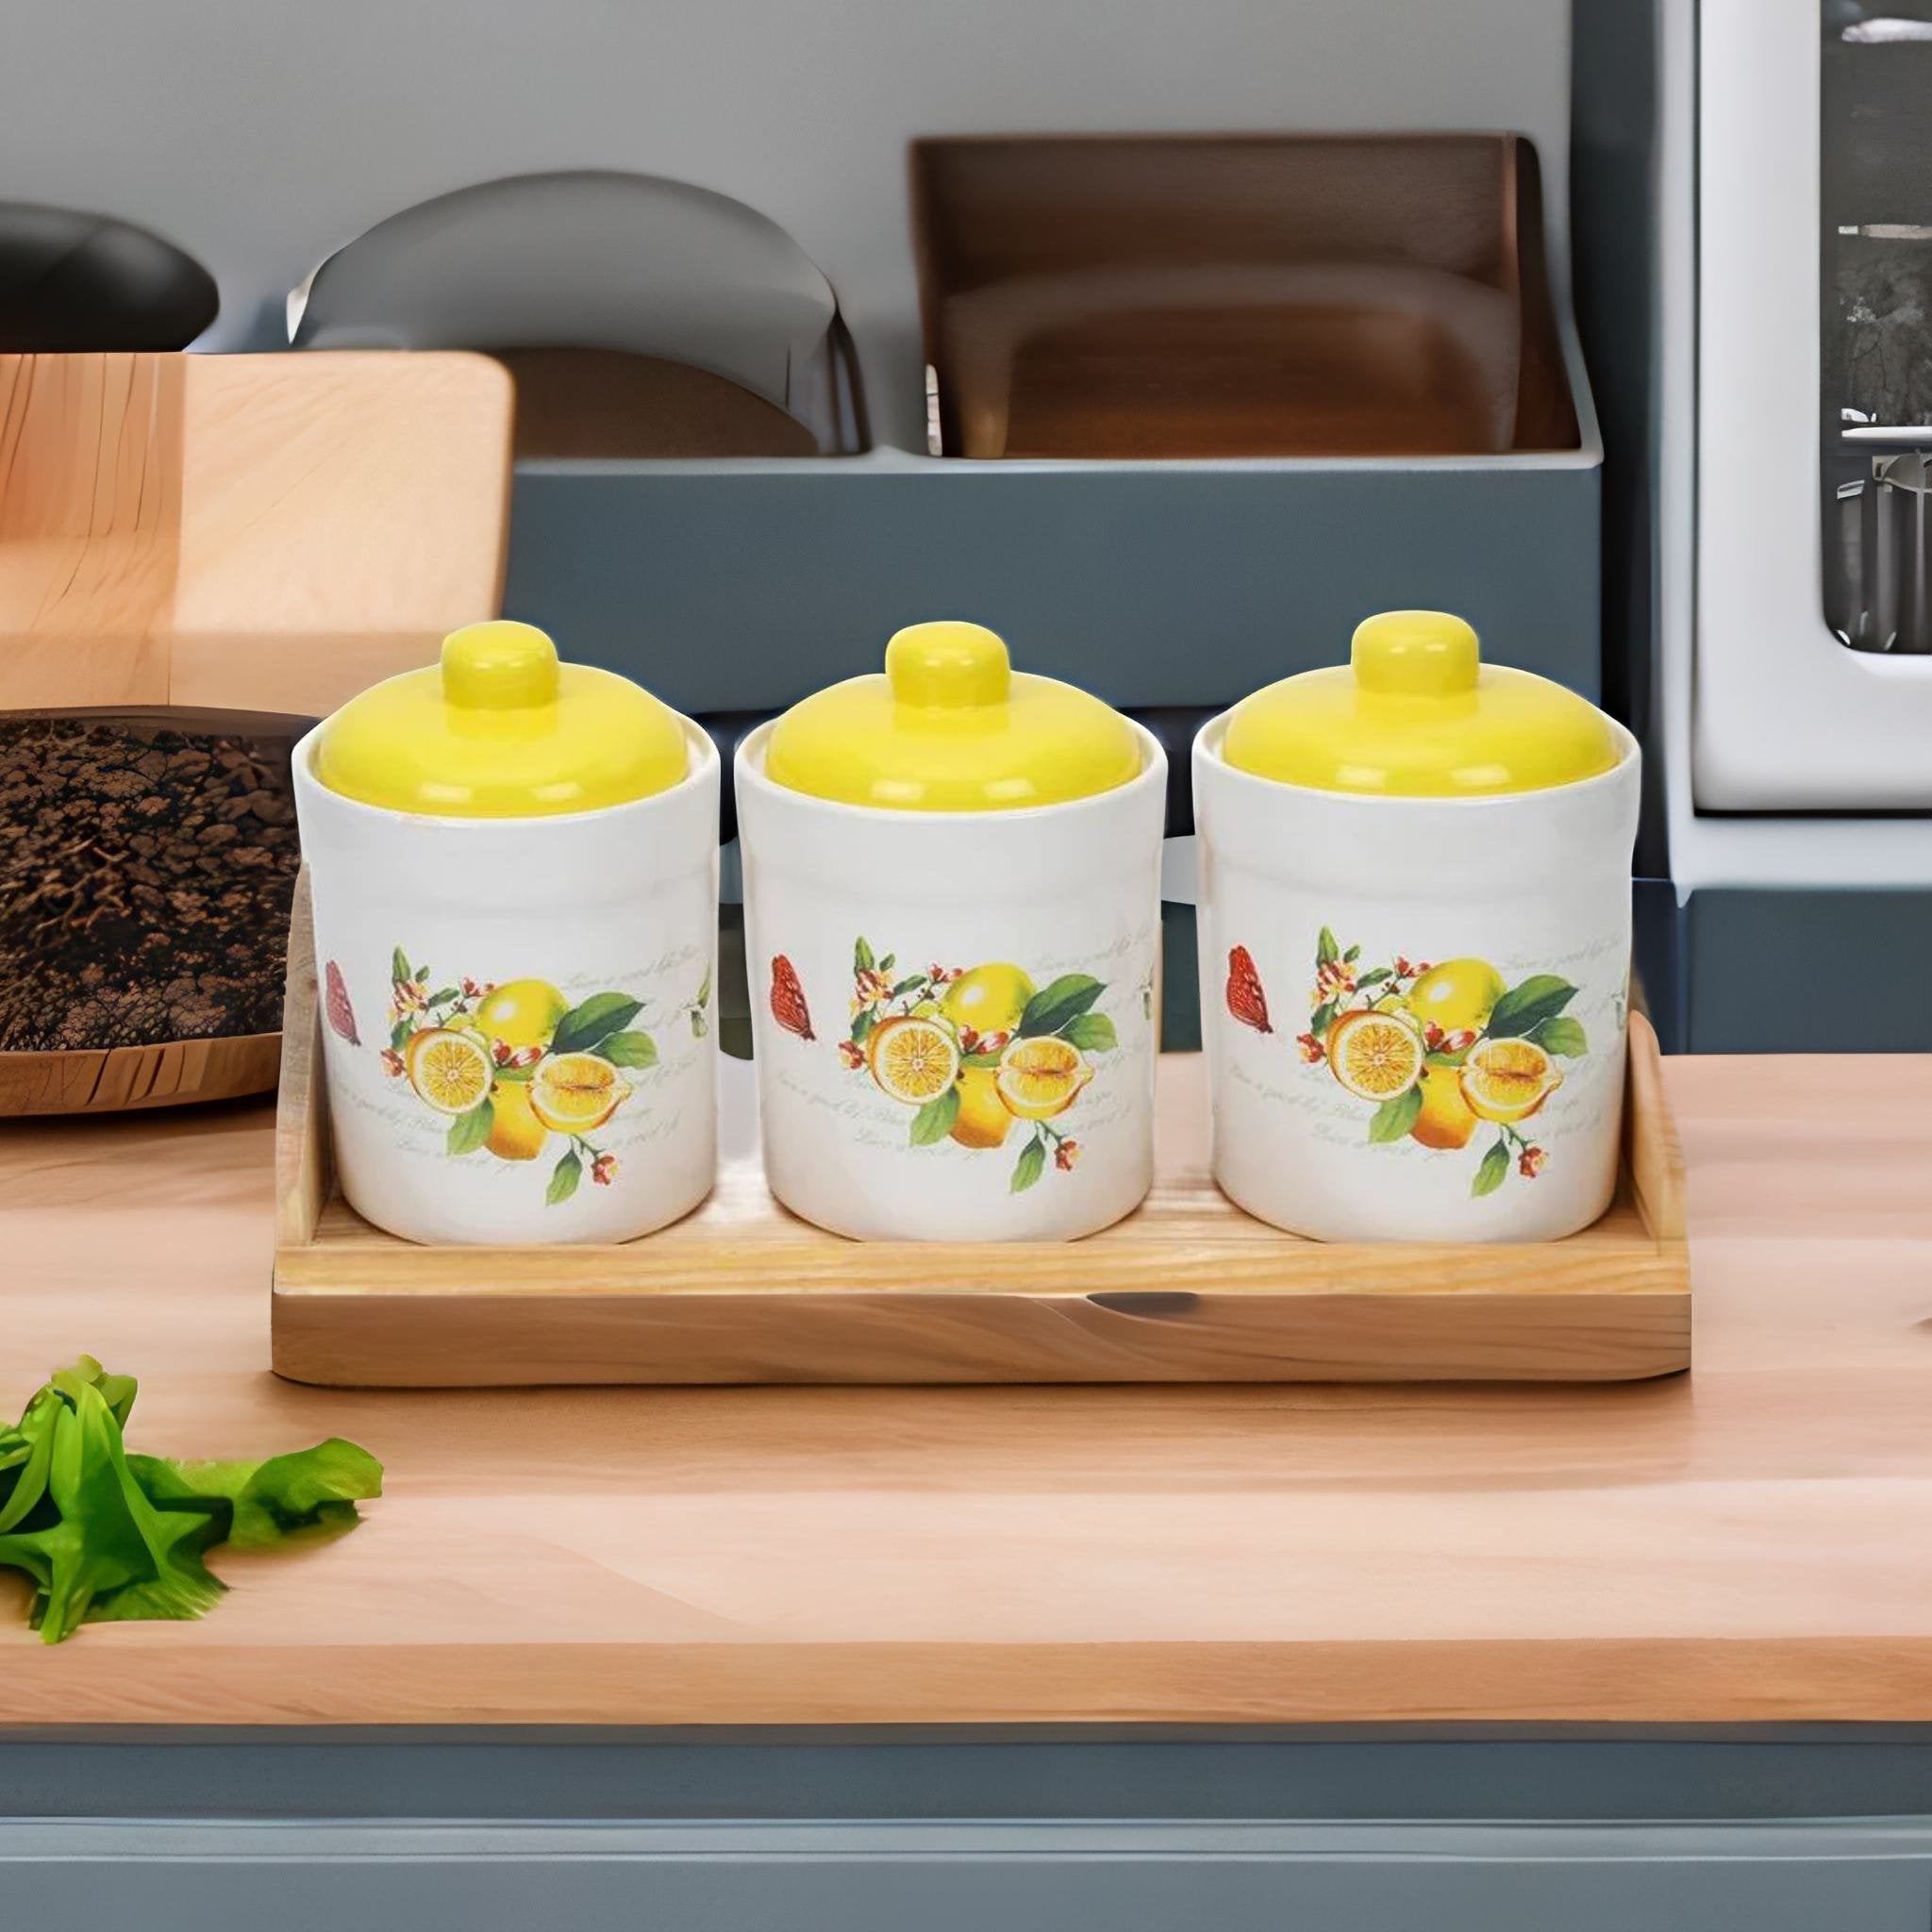 Ceramic Set Of 3 Jars With Wooden Tray (Yellow)